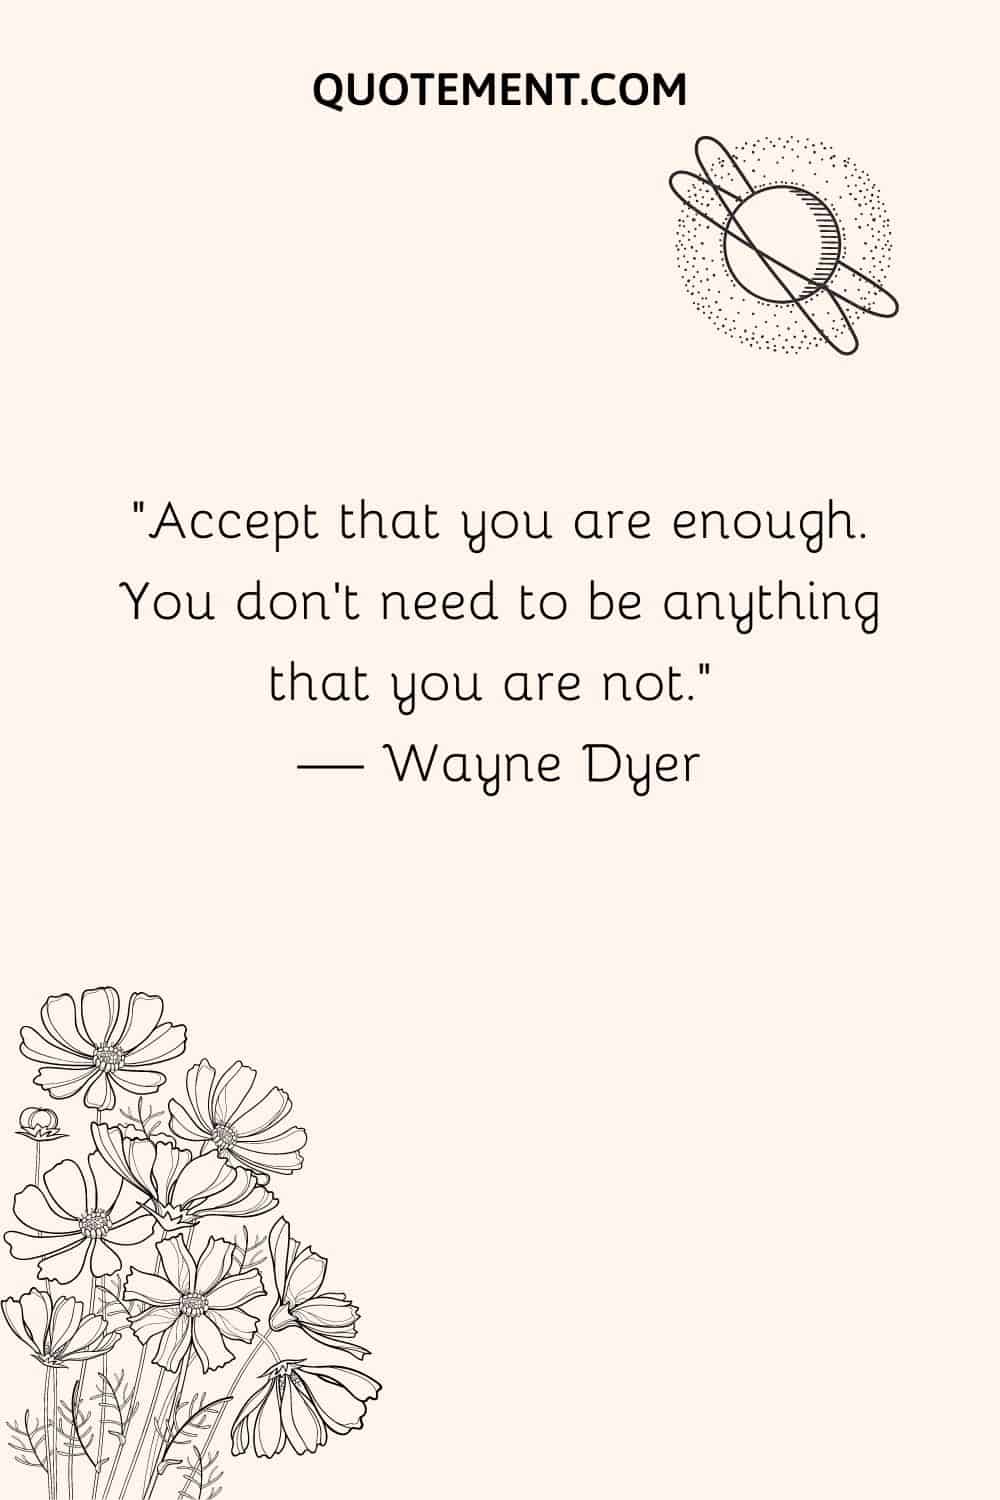 Accept that you are enough. You don't need to be anything that you are not